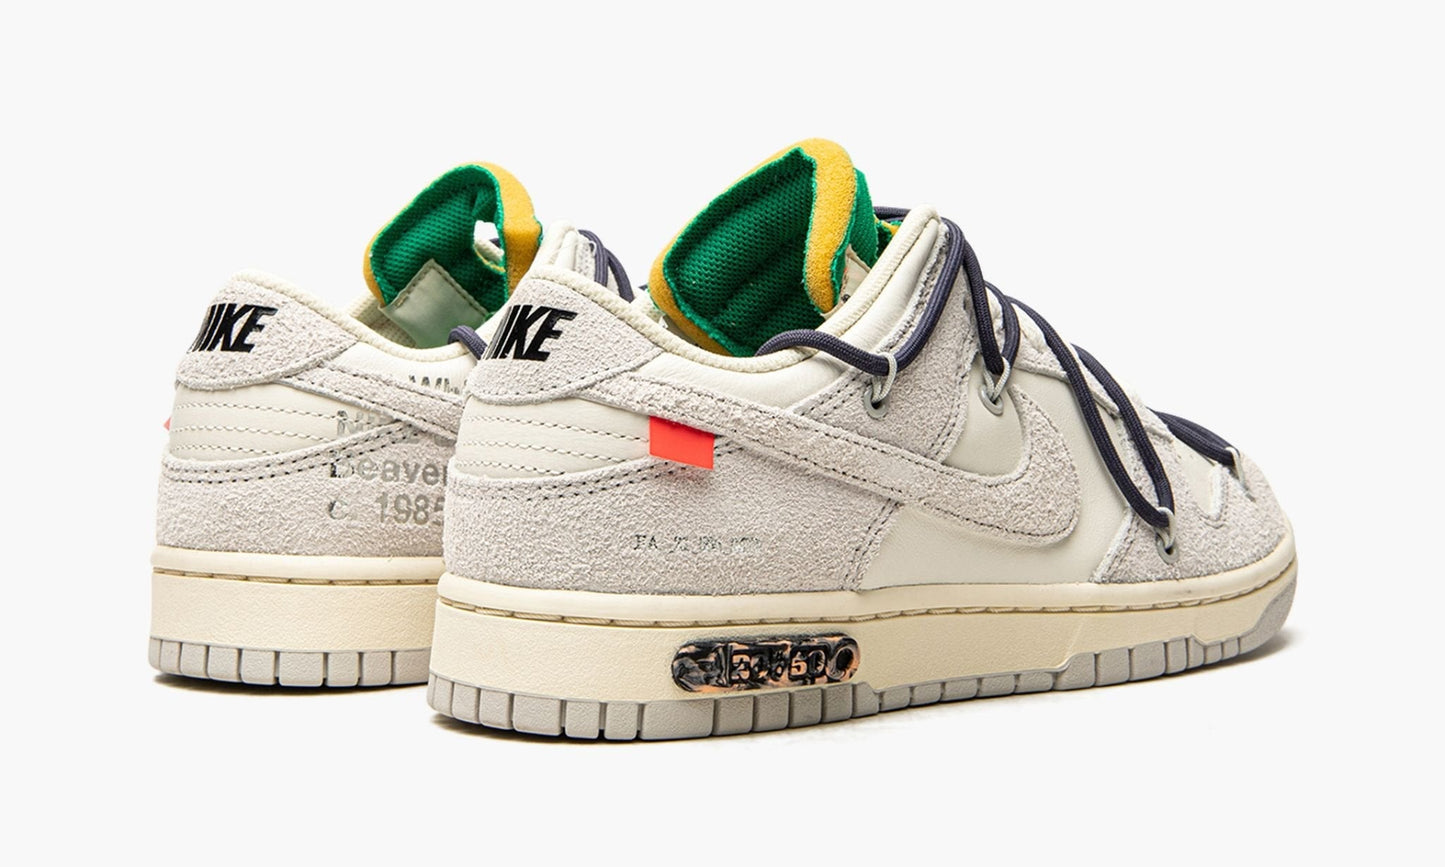 Nike Dunk Low "Off-White - Lot 20"